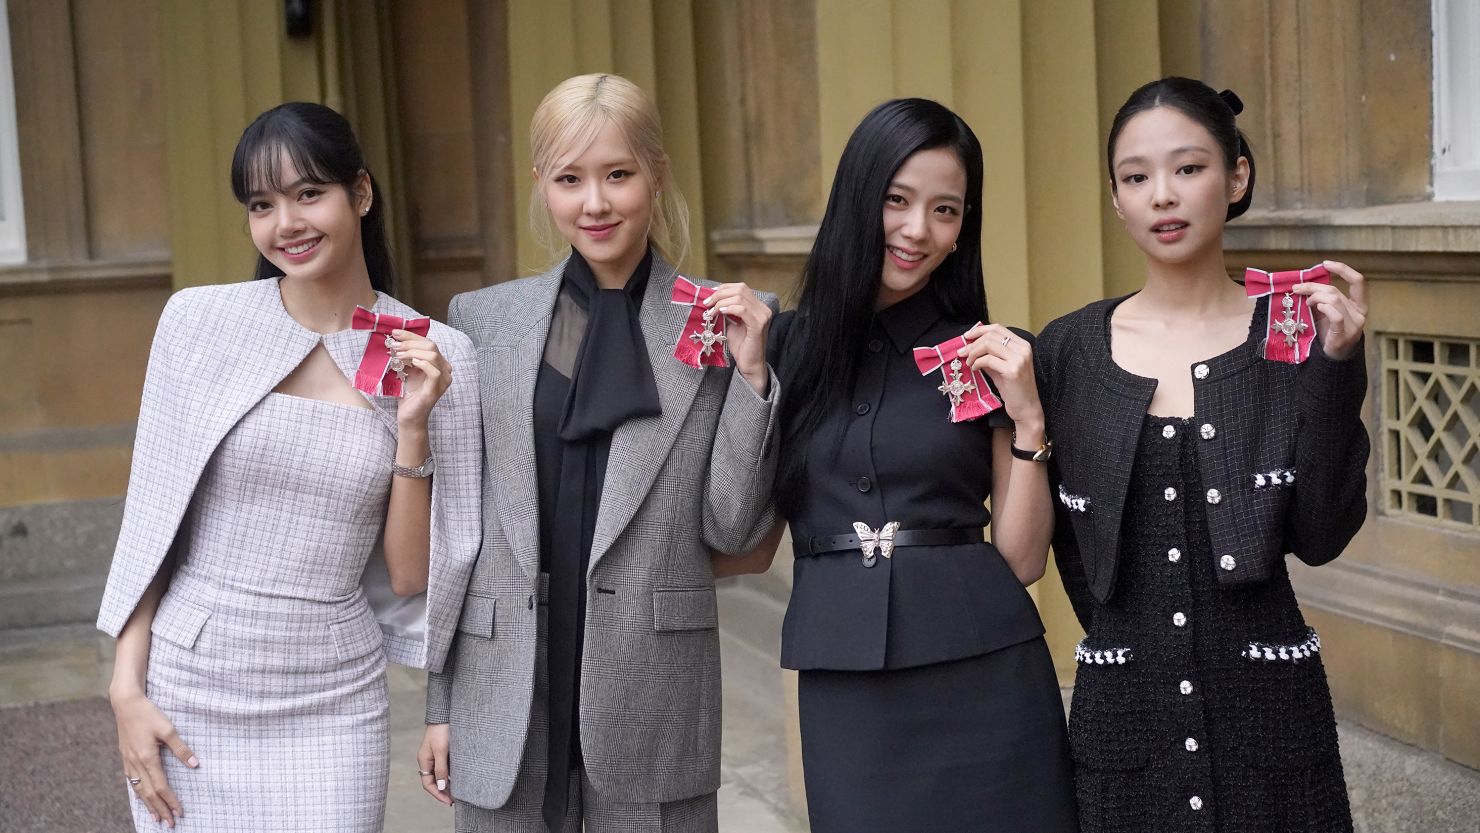 (left to right) Lisa (Lalisa Manoban), Rose (Roseanne Park), Jisoo Kim and Jennie Kim, from the K-Pop band Blackpink pose with their Honorary MBEs (Members of the Order of the British Empire), awarded to them in recognition of the band's role as COP26 advocates for the COP26 Summit in Glasgow 2021 on November 22, 2023 in London, England. King Charles III conducted the special Investiture ceremony in the presence of the President of South Korea, Yoon Suk Yeol, and his wife, Kim Keon Hee.